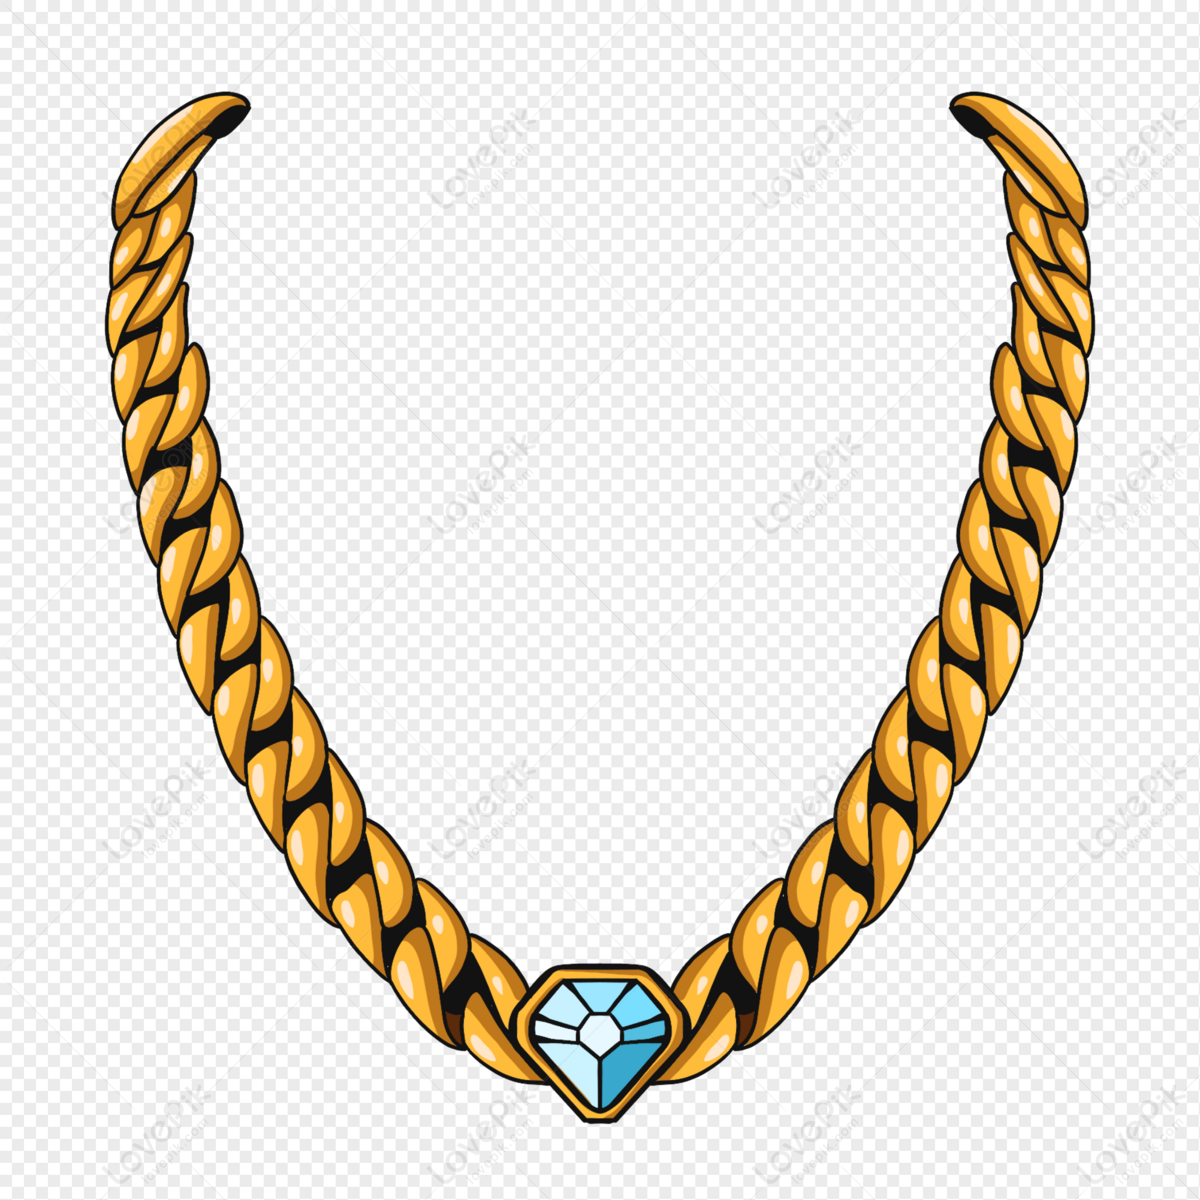 Download Jewellery Chain Clipart HQ PNG Image | FreePNGImg